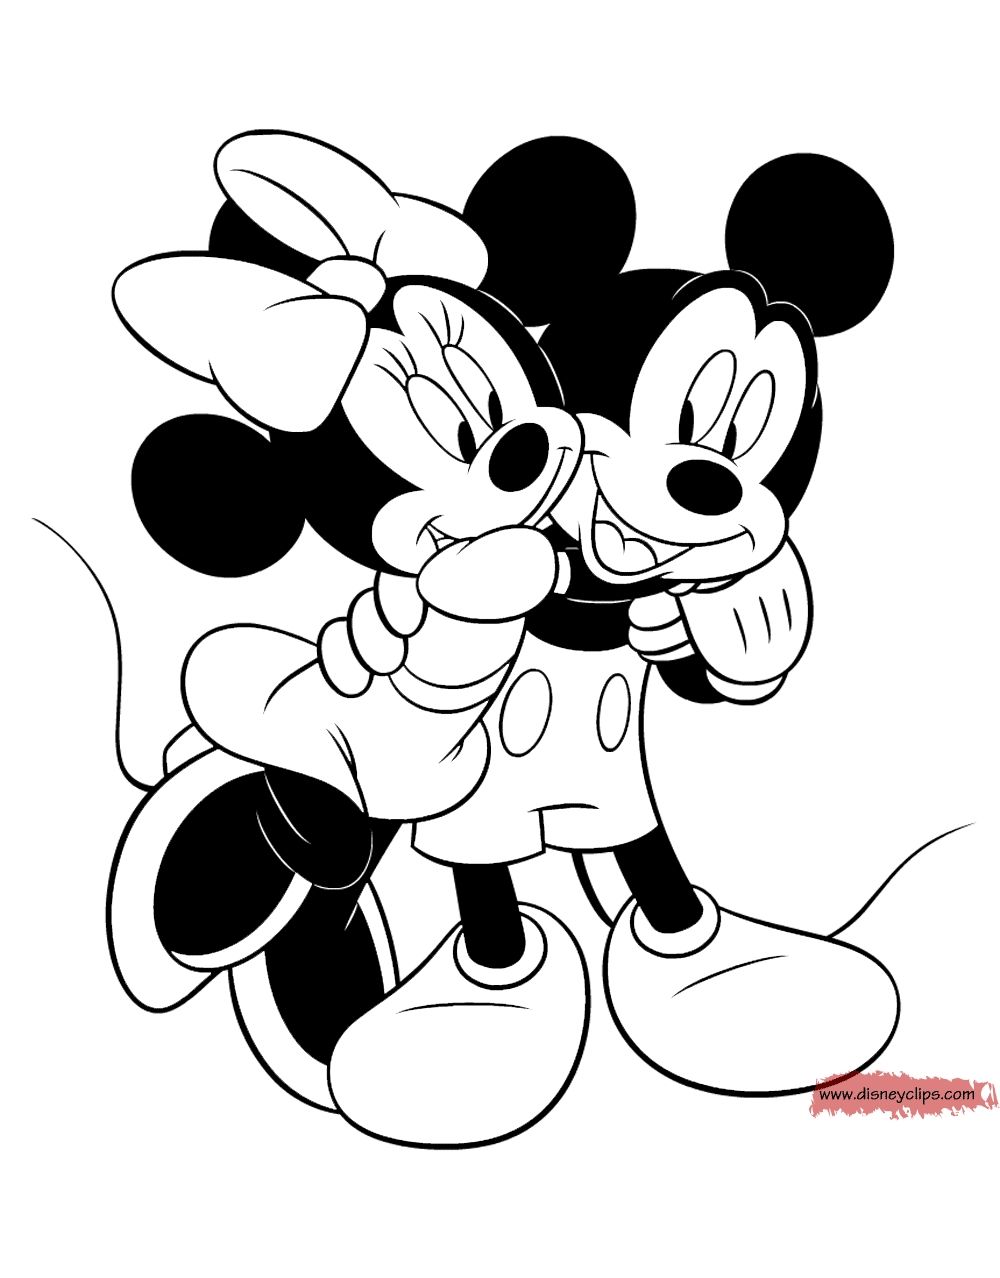 Mickey And Minnie Mouse Kissing Coloring Pages At GetColorings 